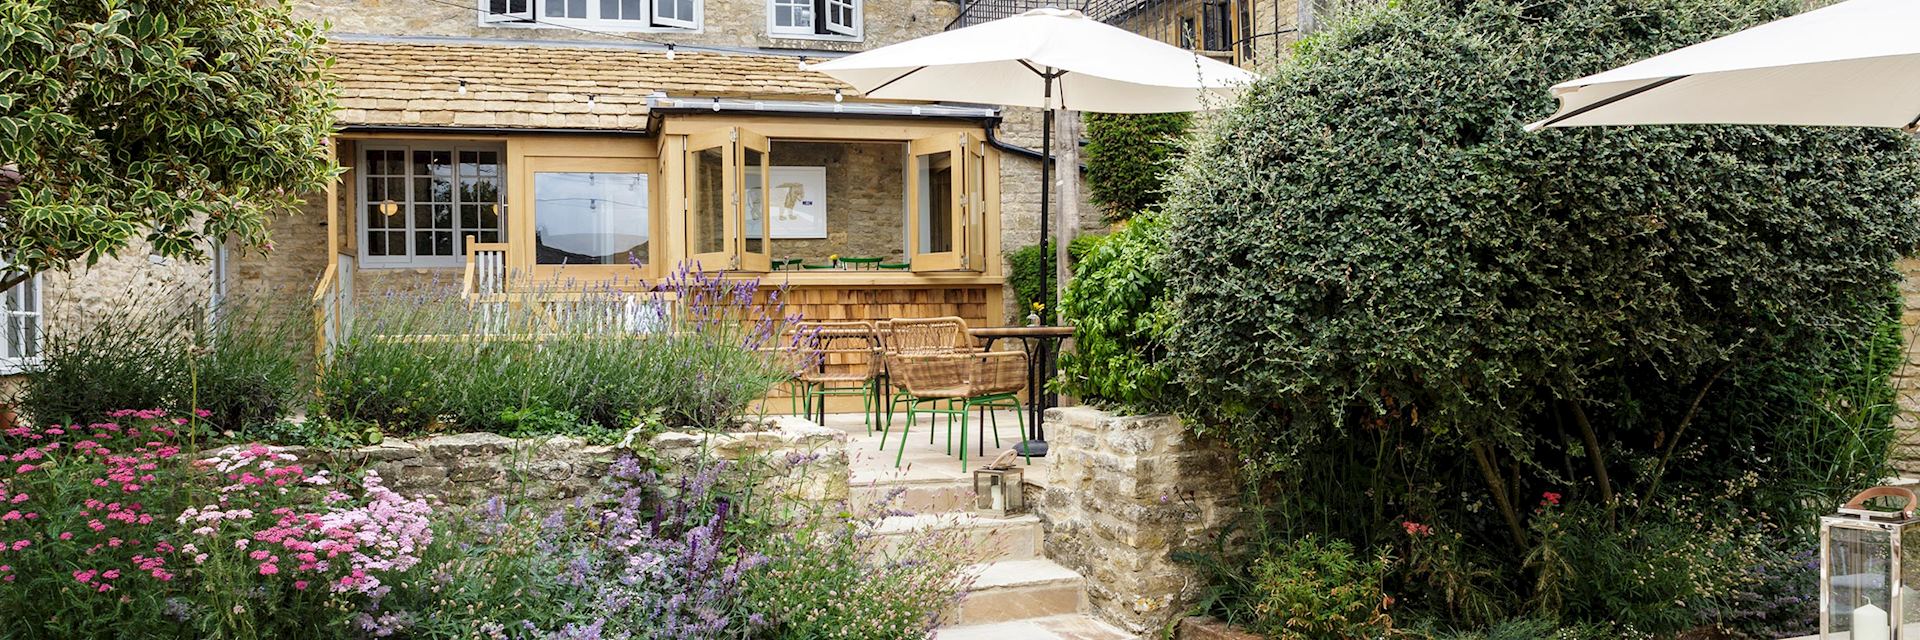 The Old Stocks Inn, Cotswolds